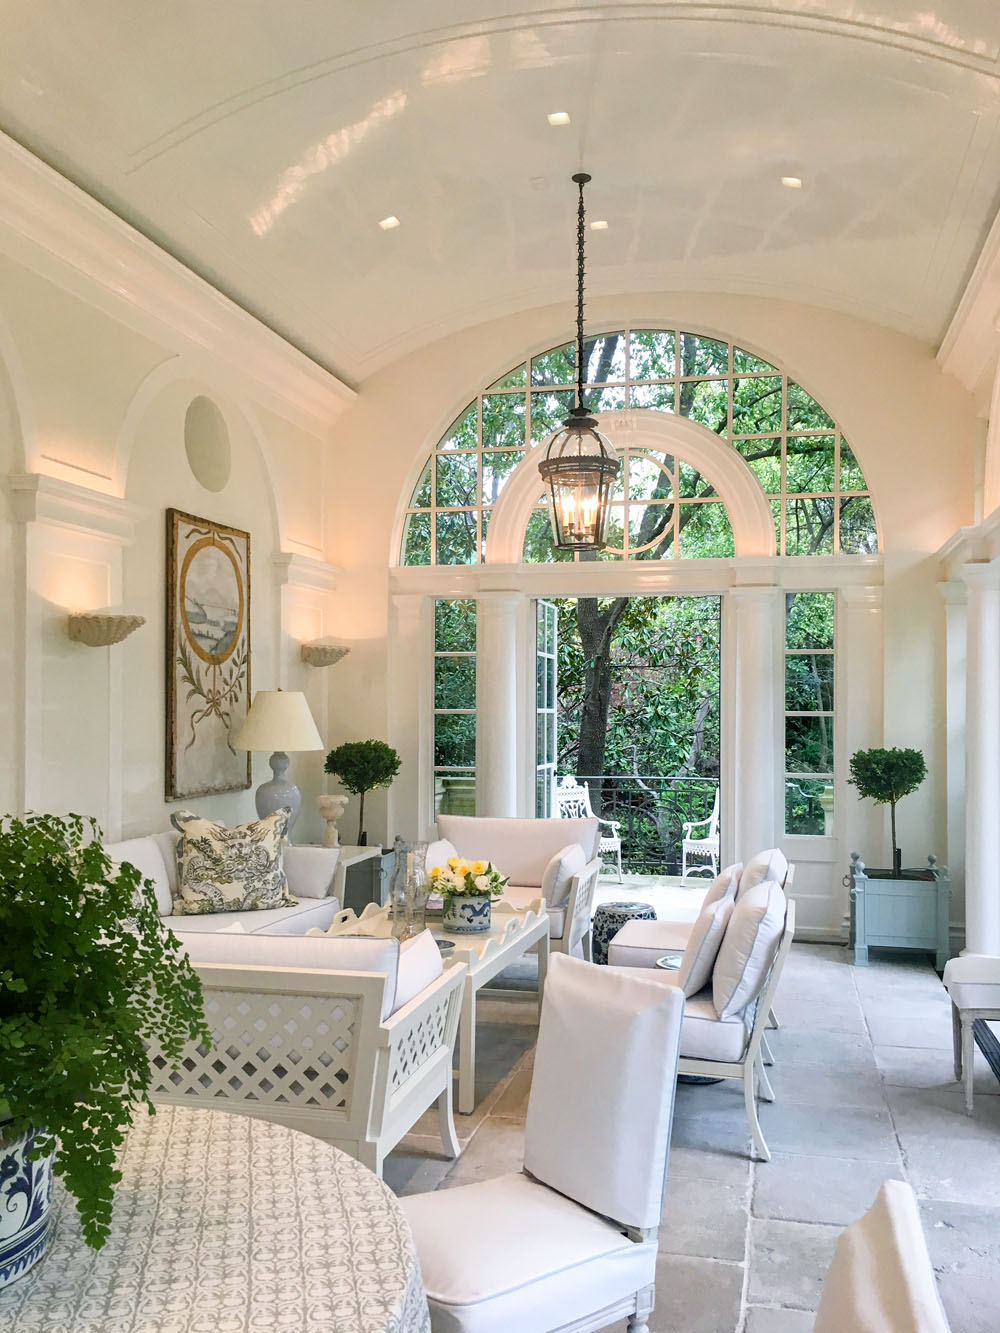 The Orangery with Timeless Classic Design